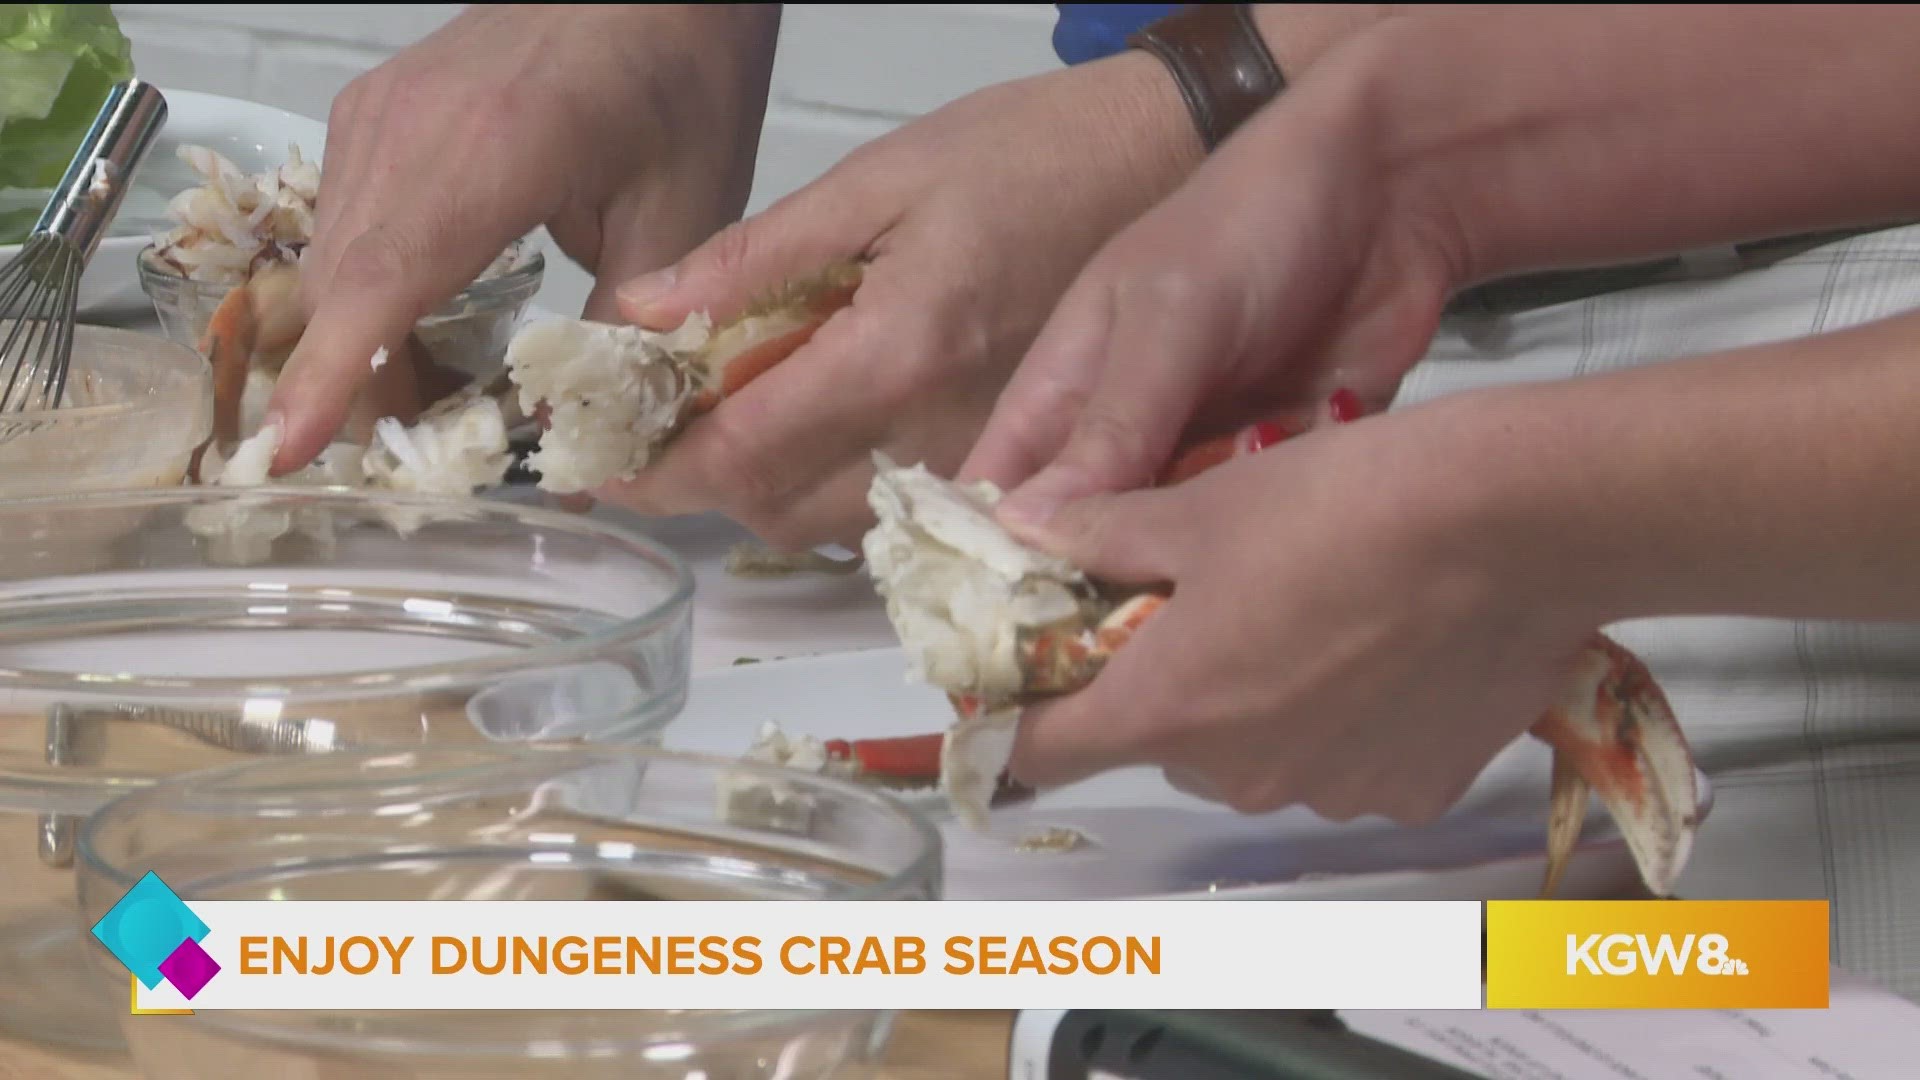 This segment is sponsored by the Oregon Dungeness Crab Commission